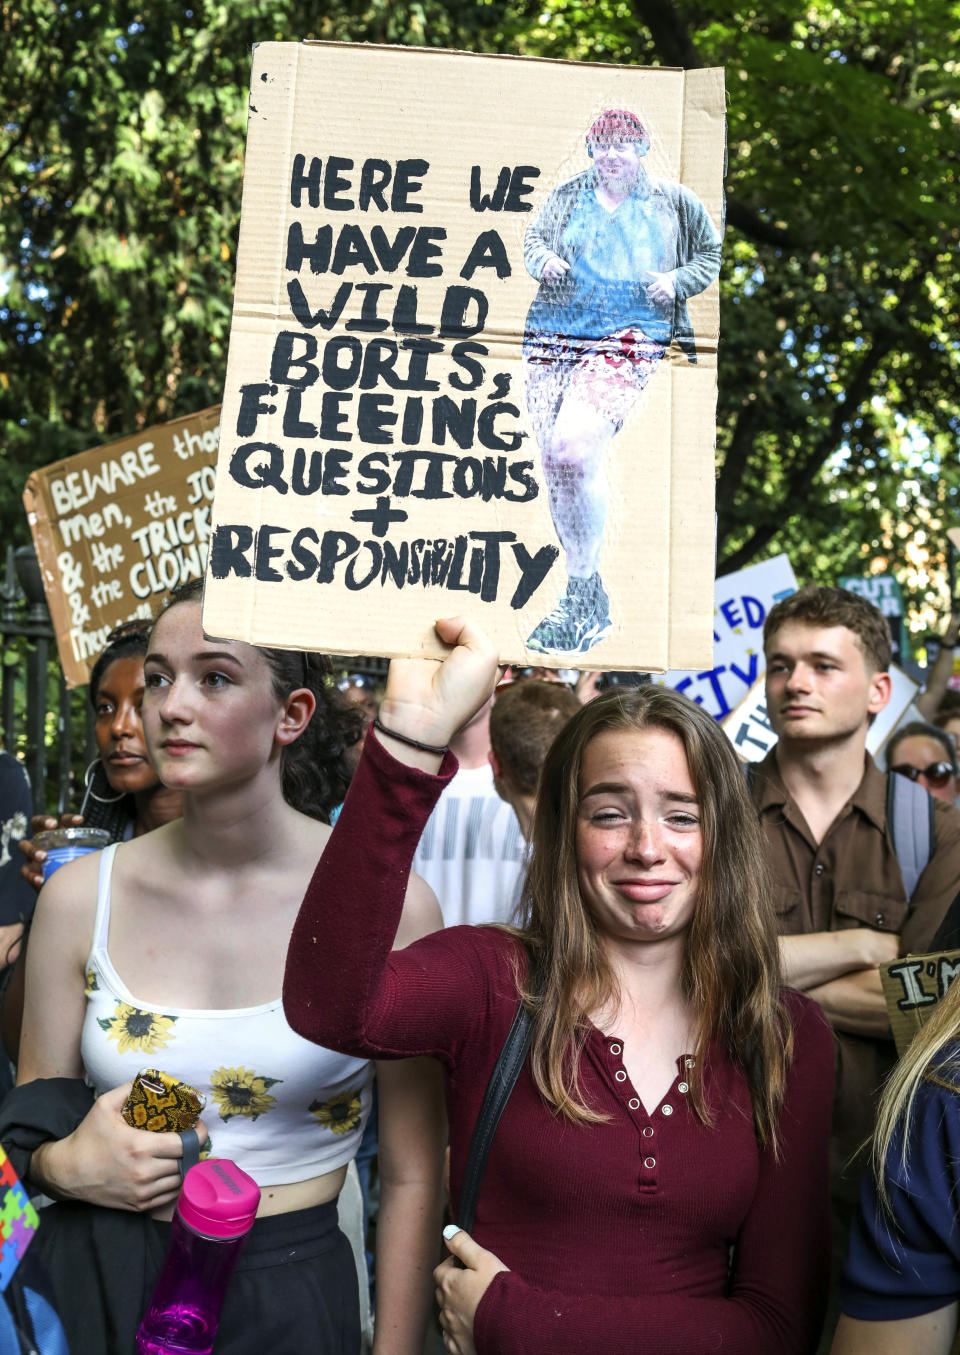 Young people take to the streets to oppose the election of the new British Prime Minister Boris Johnson in London, Wednesday, July 24, 2019. Boris Johnson has replaced Theresa May as Prime Minister, following her resignation last month after Parliament repeatedly rejected the Brexit withdrawal agreement she struck with the European Union. (AP Photo/Vudi Xhymshiti)